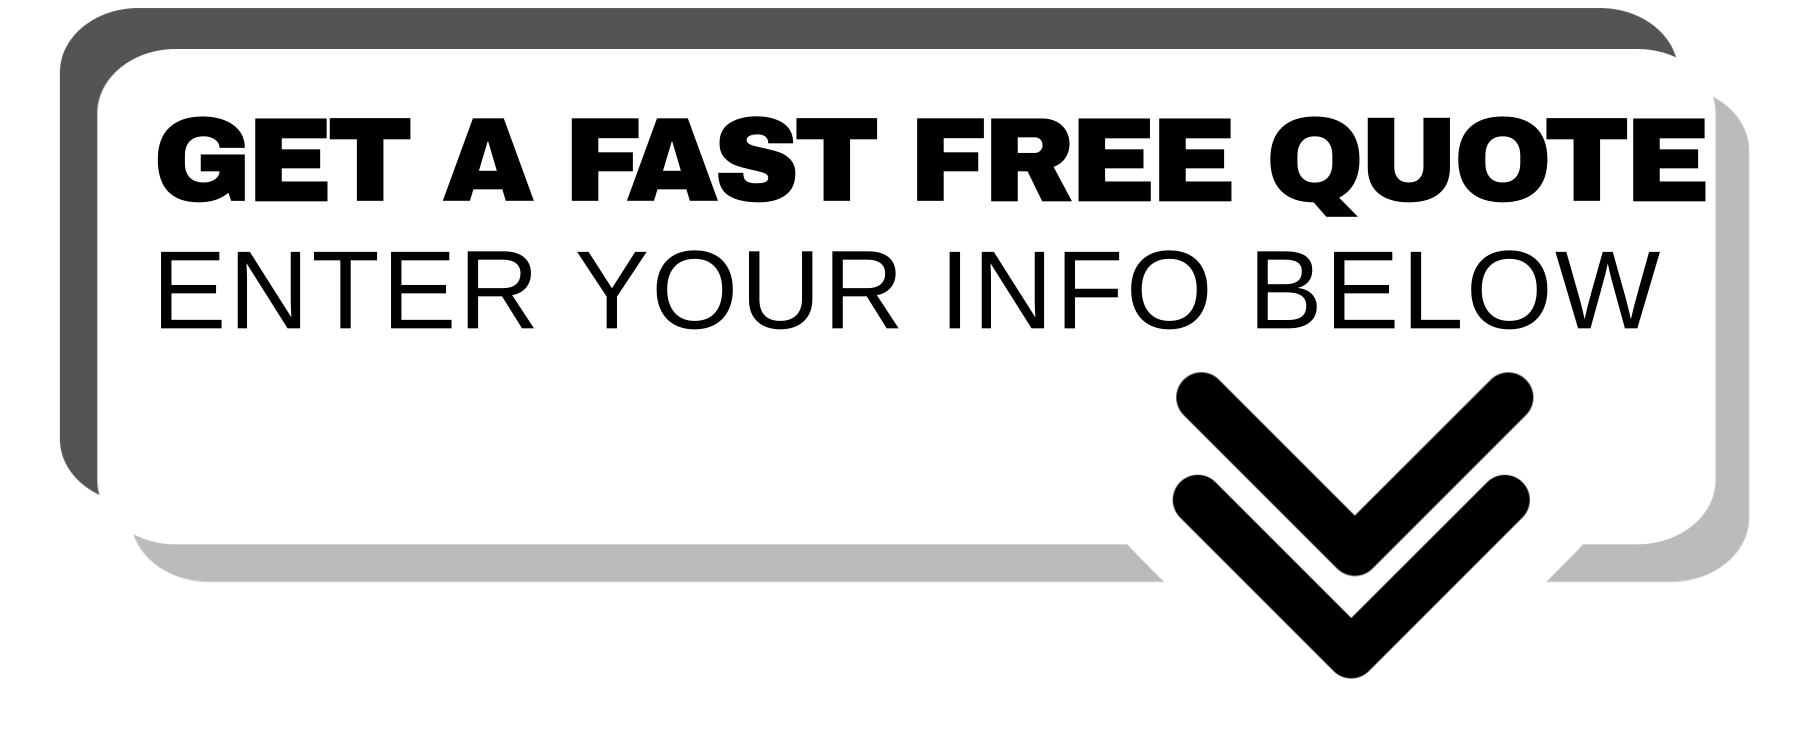 Free fast quote banner